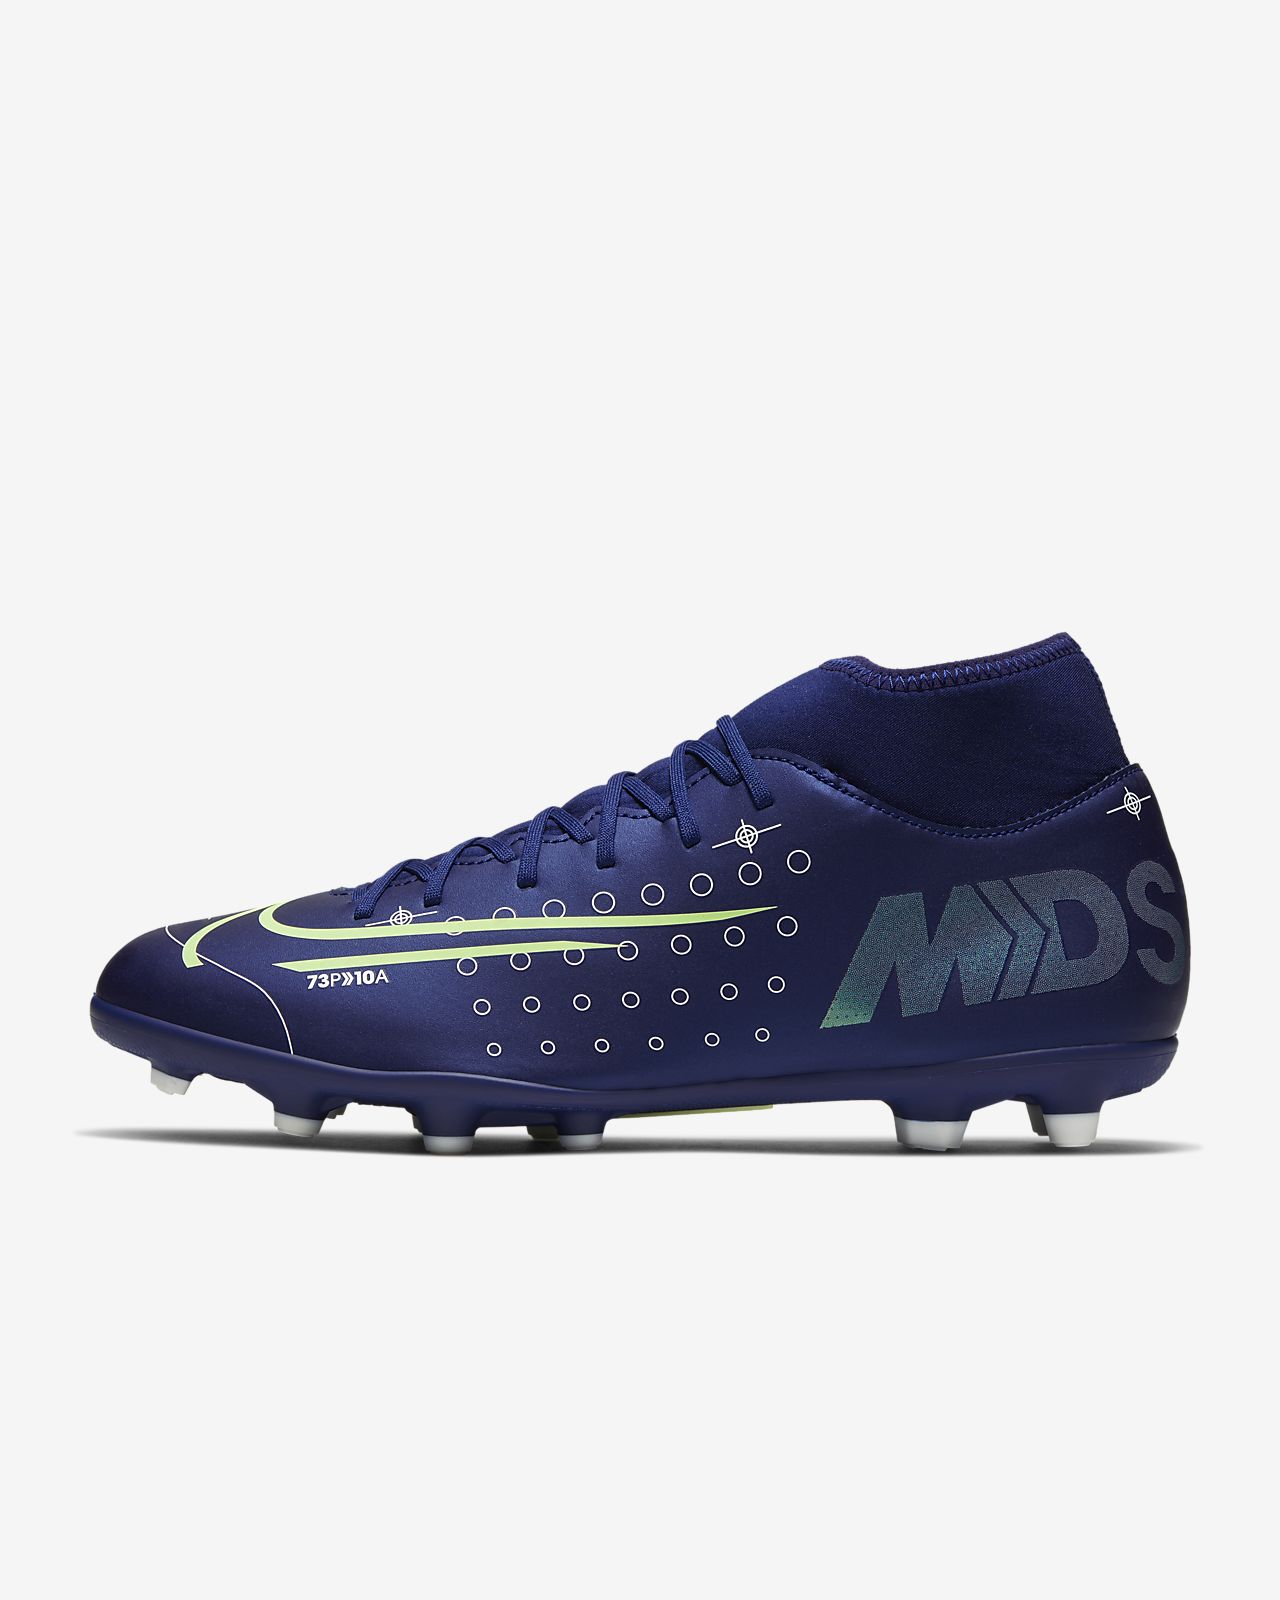 Buy Cheap Nike Mercurial Superfly Black And Gold